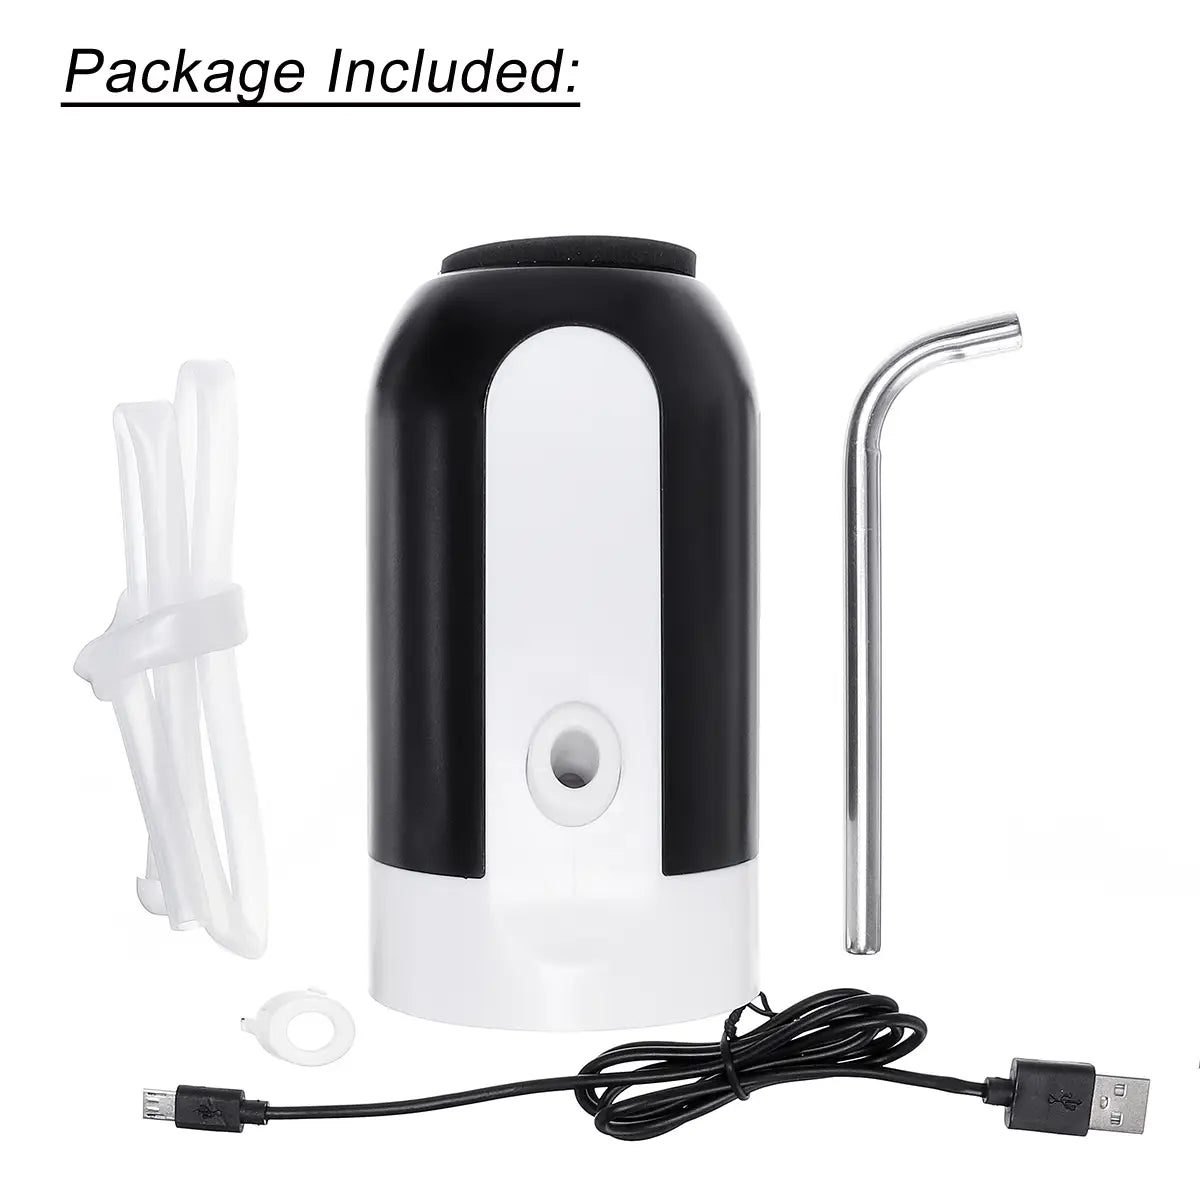 Electric Automatic Water Pump Dispenser Gallon Drinking